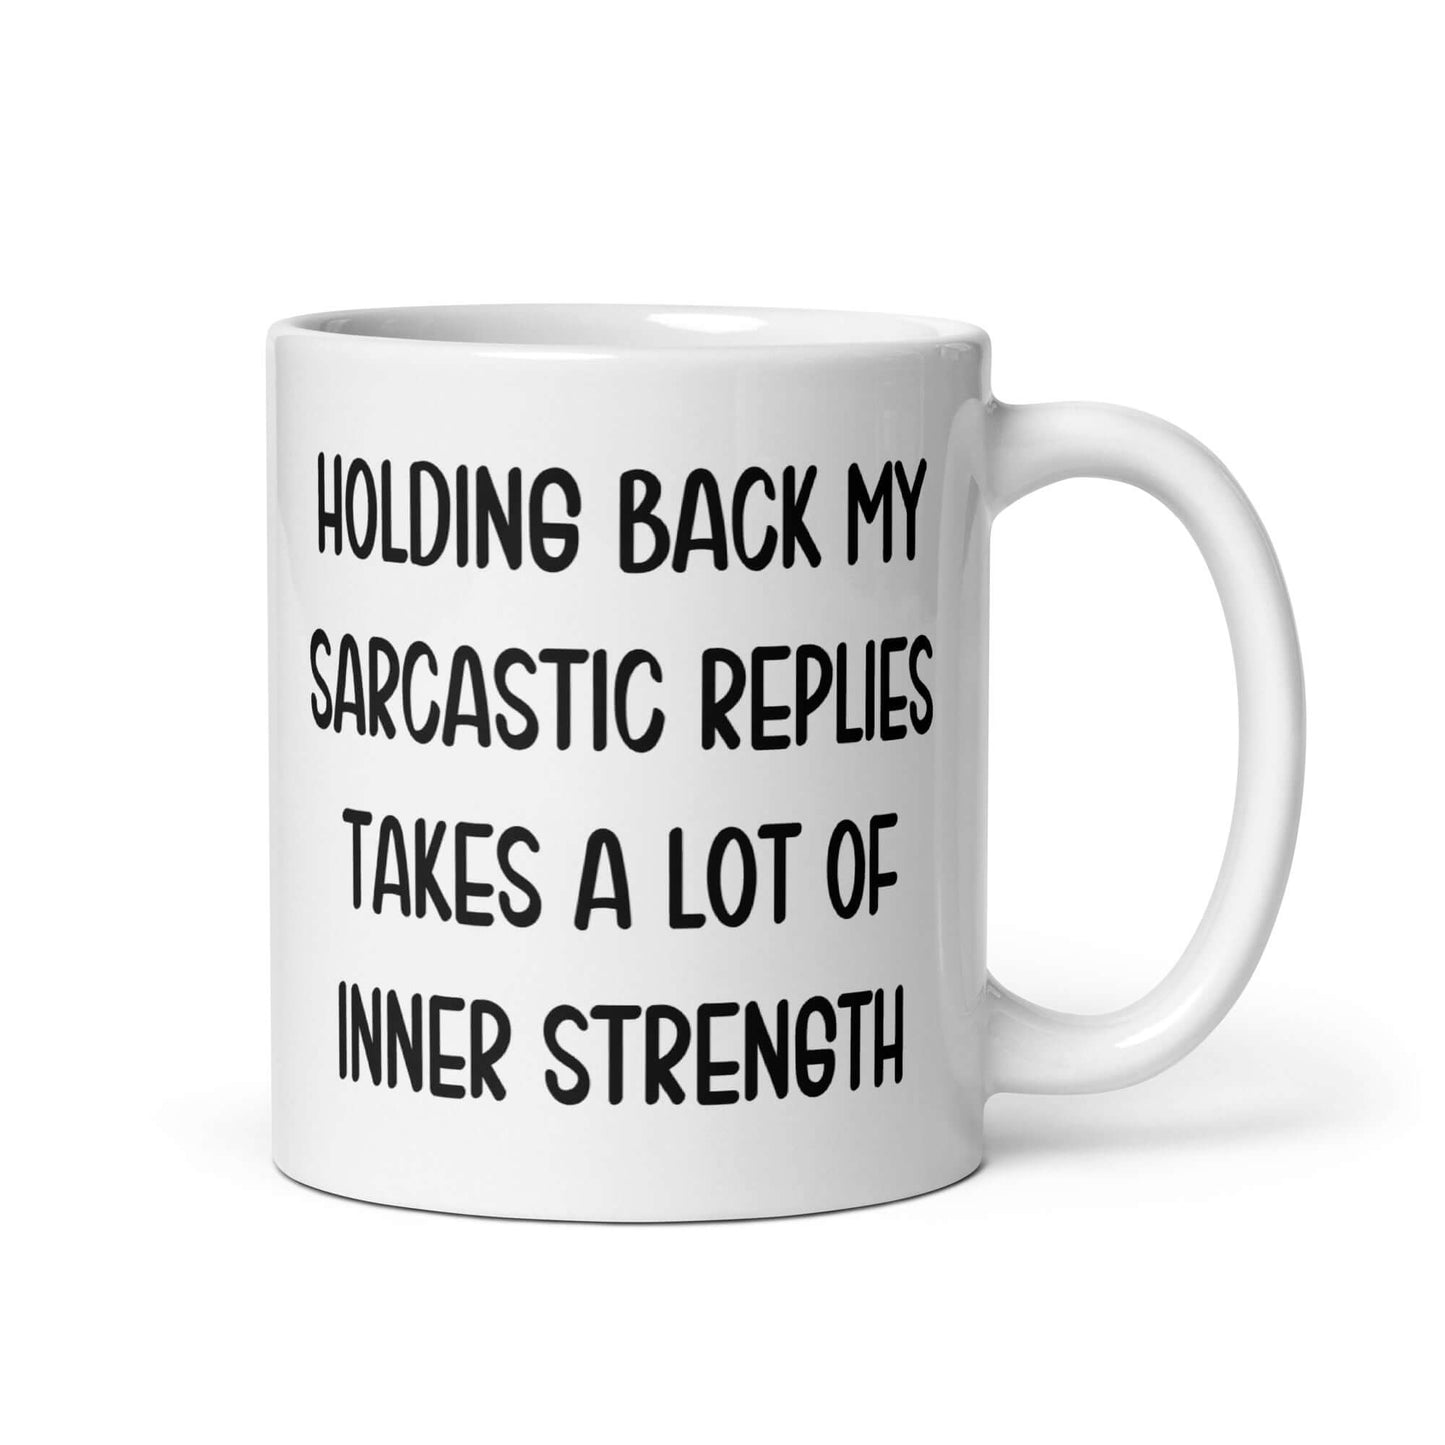 White ceramic mug with the phrase Holding back my sarcastic replies takes a lot of inner strength printed on both sides of the mug.